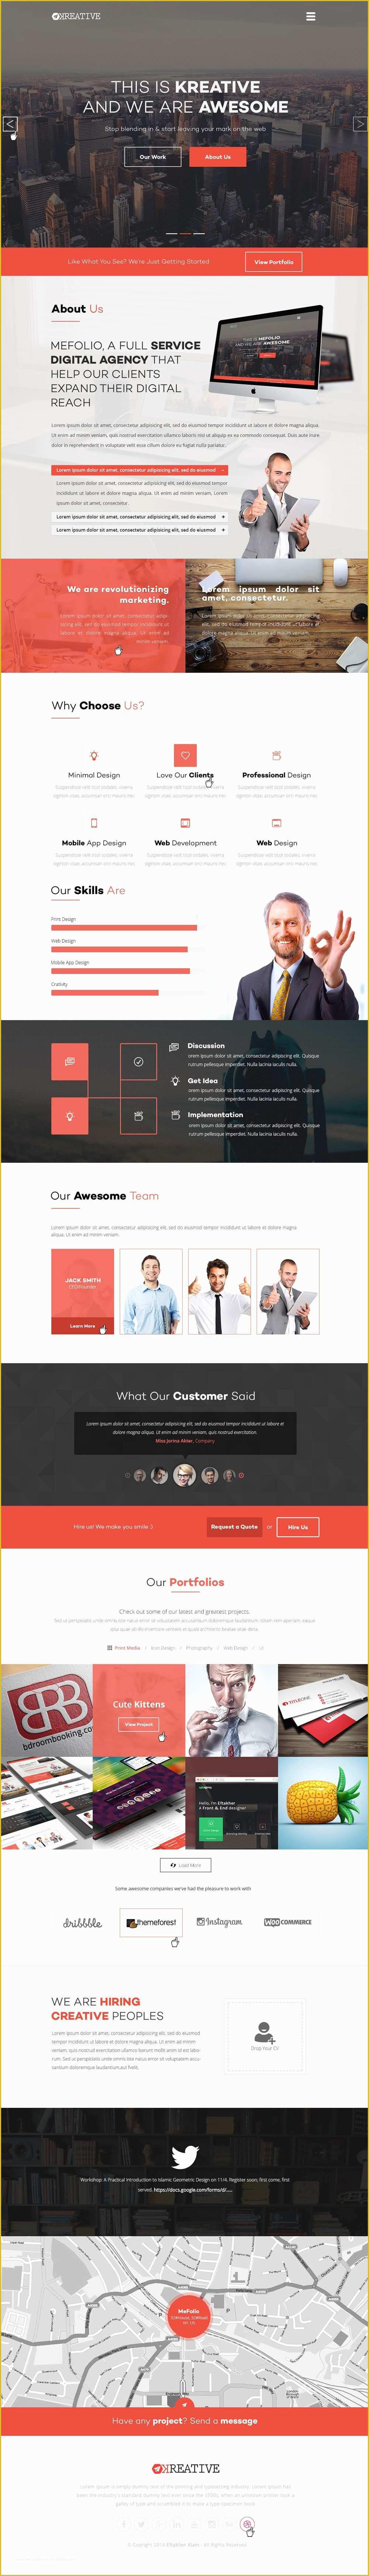 Startup Website Template Free Of Free Agency Website Templates Psd Css Author